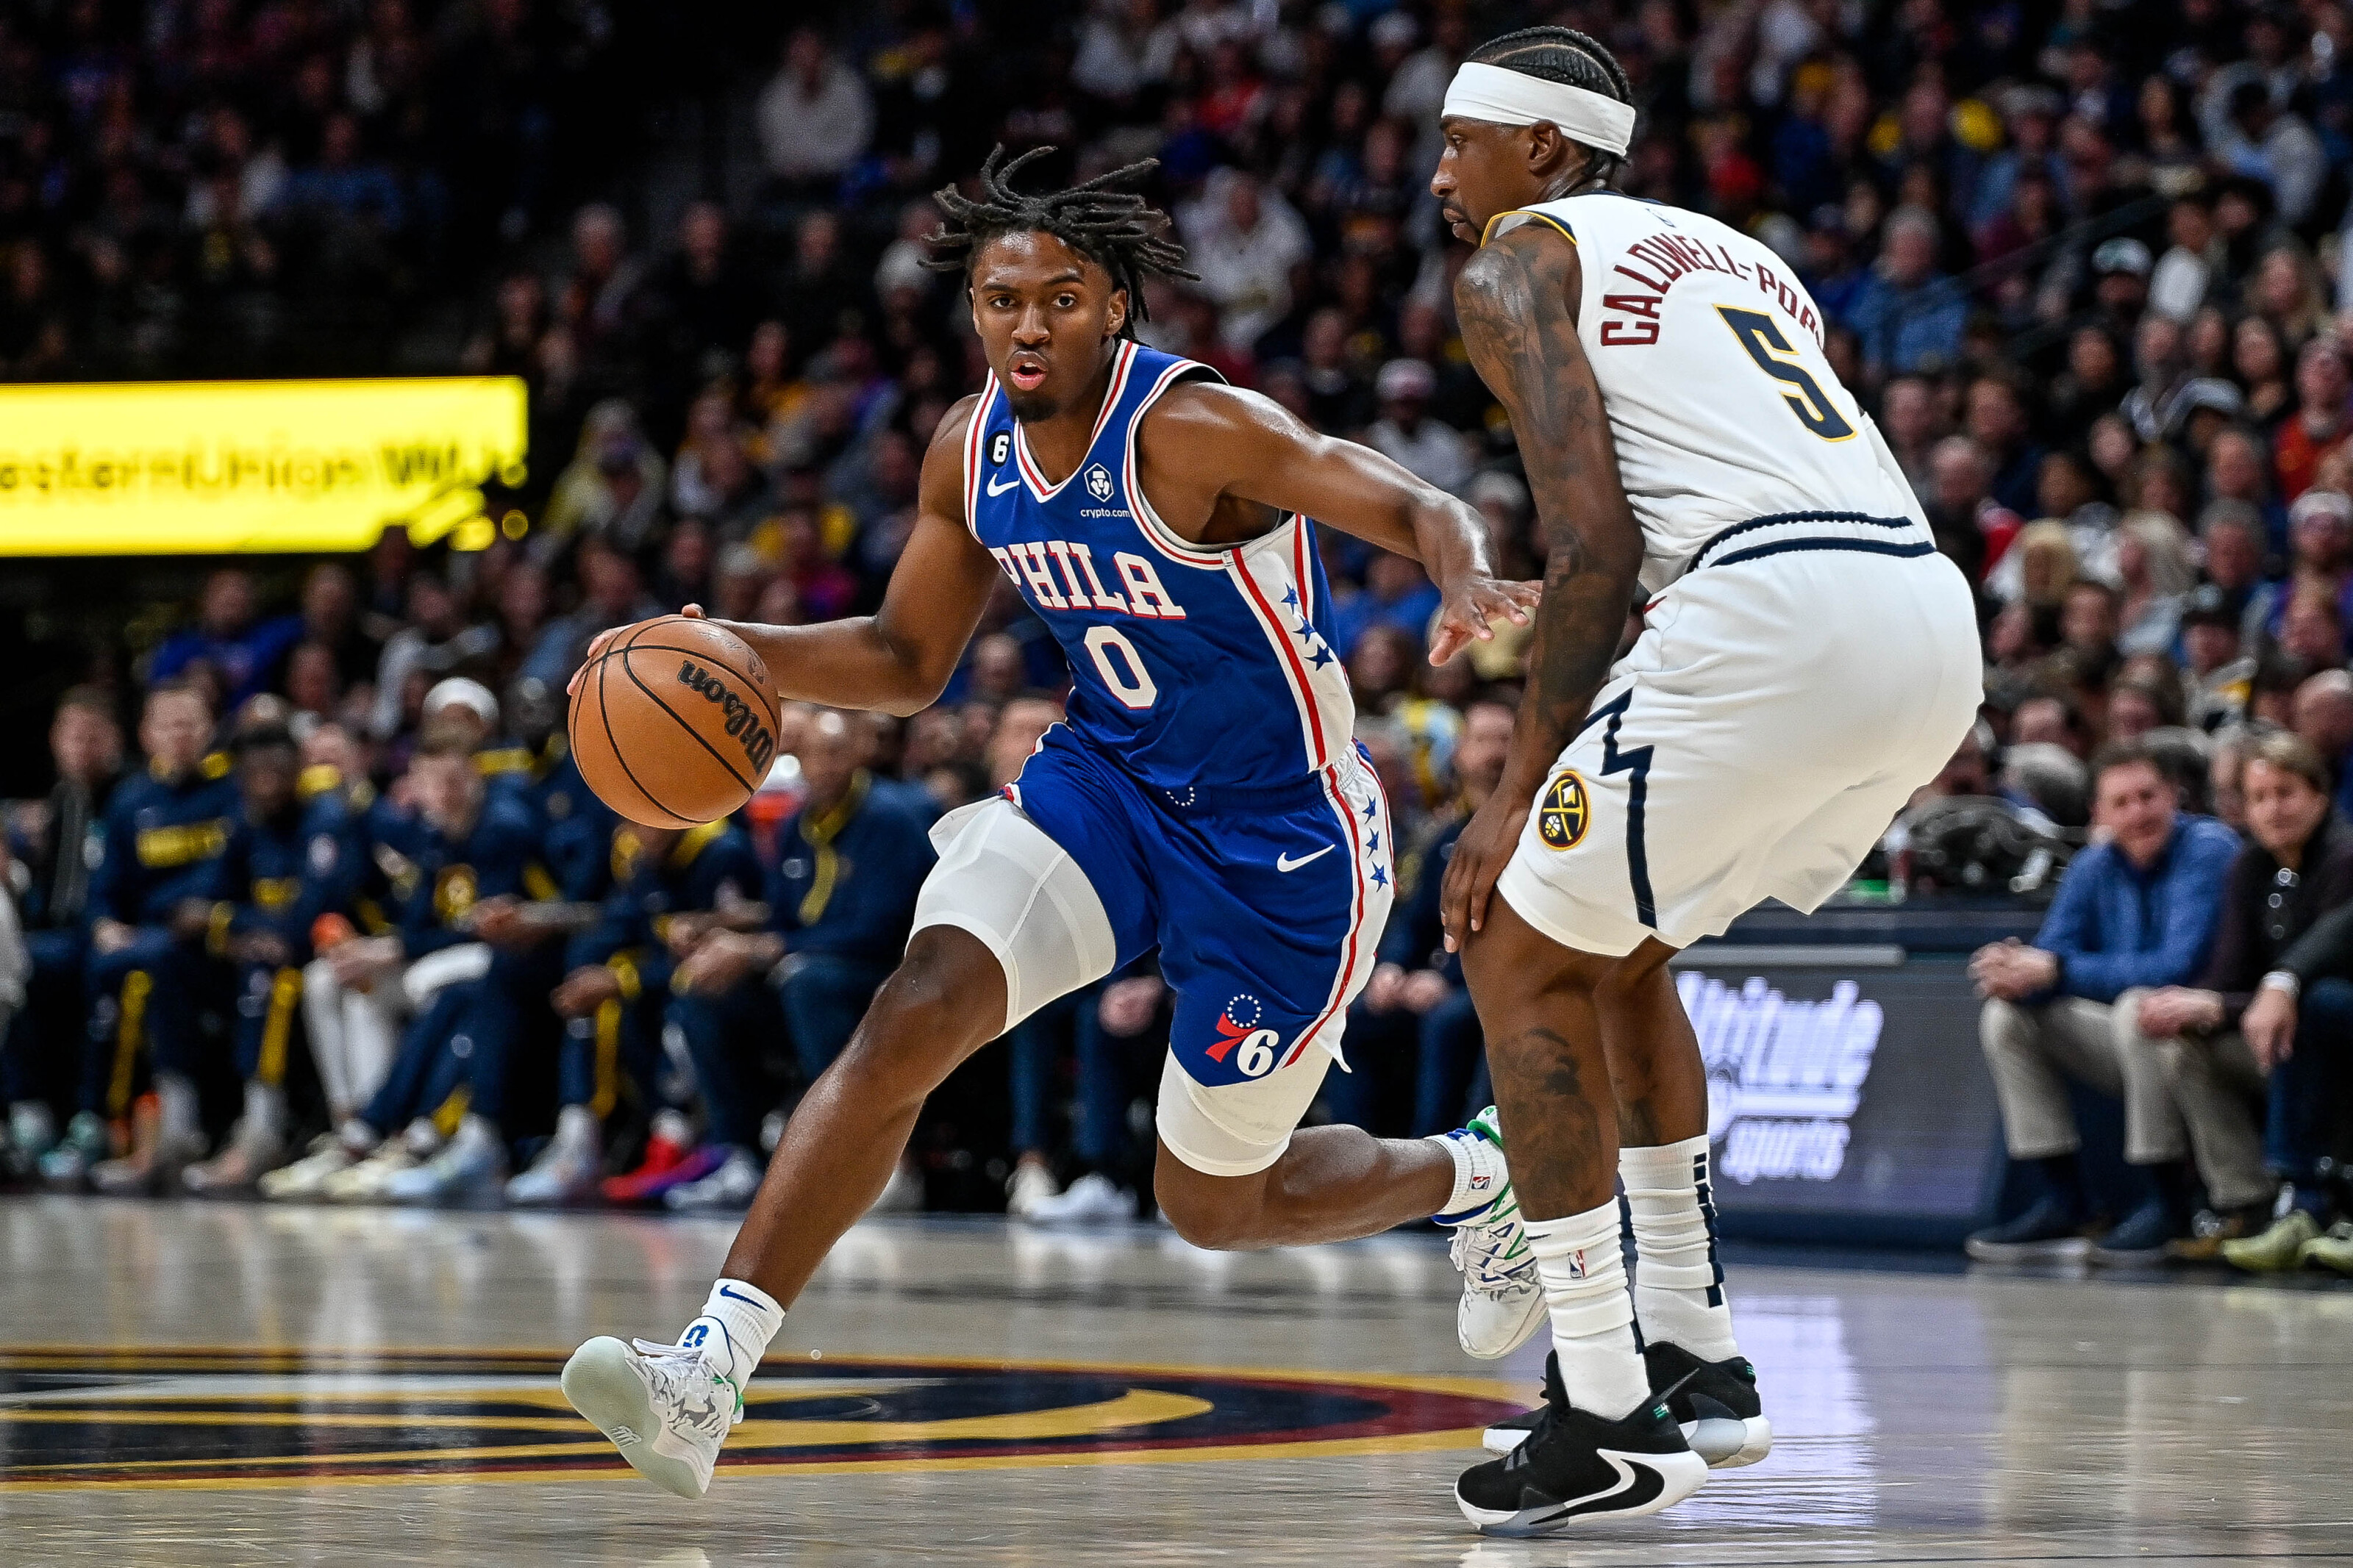 NBA Rumors; Sixers Don't Plan To Extend Tyrese Maxey